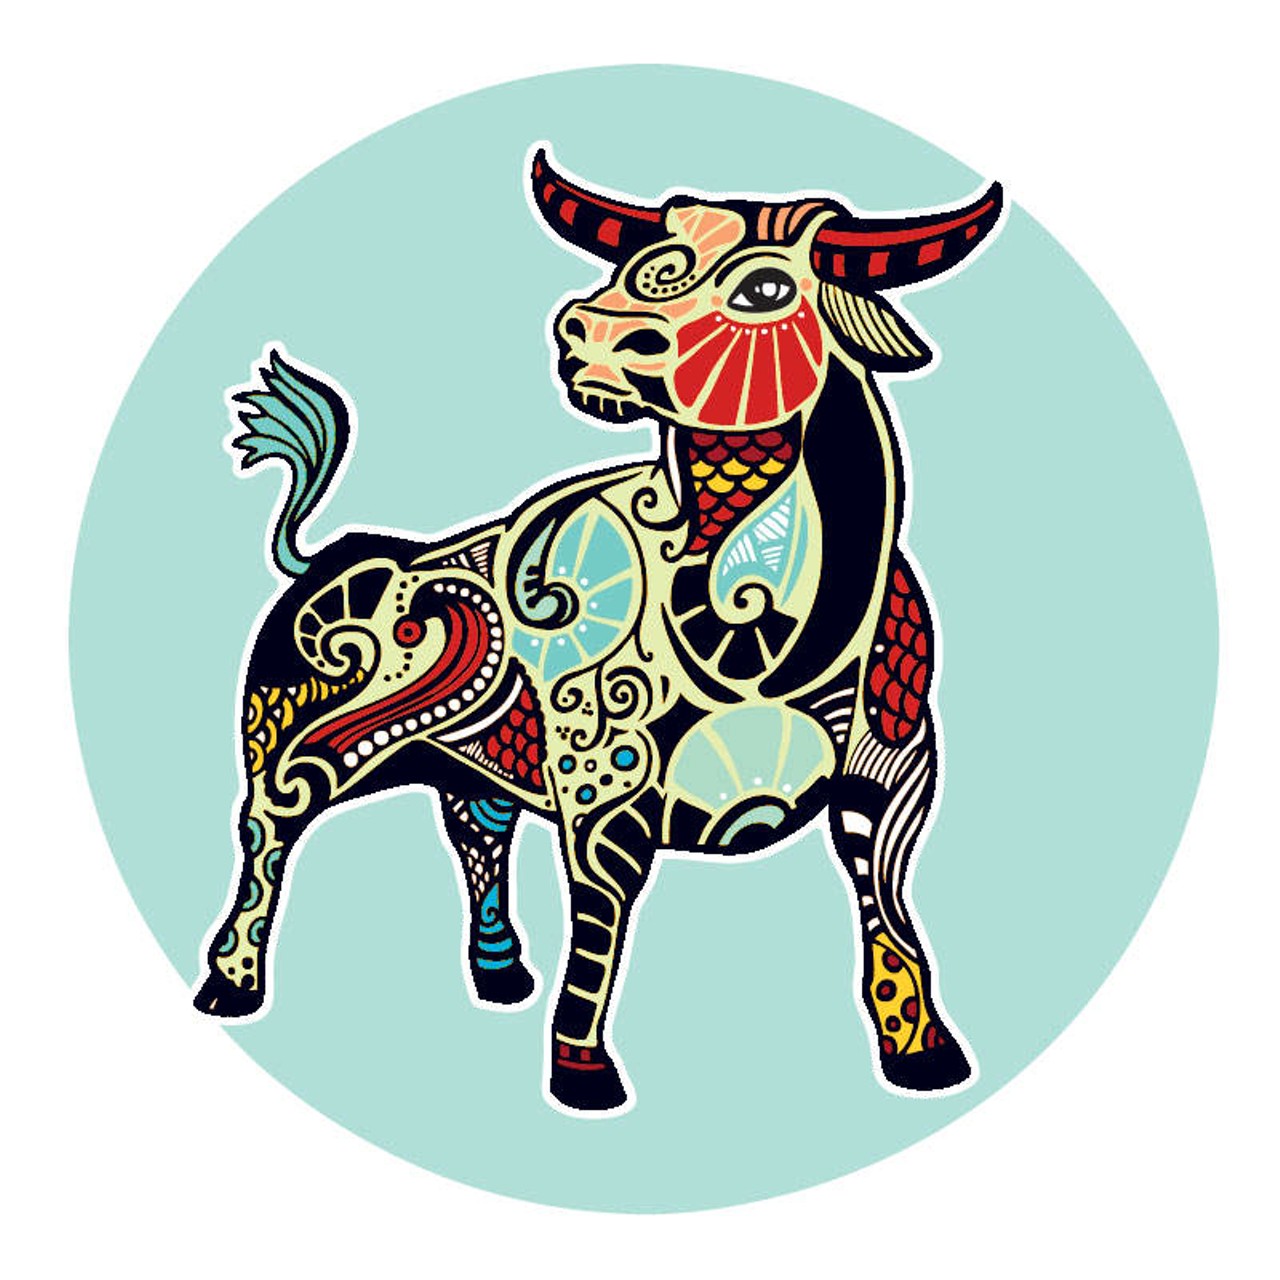 TAURUS: April 21 &#150; May 20
If you are in a situation that refuses to yield to your intent, you don't have much choice but to back off. It's great to be so sure about what needs to happen, but when it doesn't come to fruit, you have to look at the facts. Once you get clear about where adjustments need to take place, ask yourself if what you envisioned will survive the overhaul. This may be one of those times when you have to cut bait and move into something that has a more authentic ring to it. Be mindful of the company you keep and if money is the operative word, don't let it hold sway over this choice.